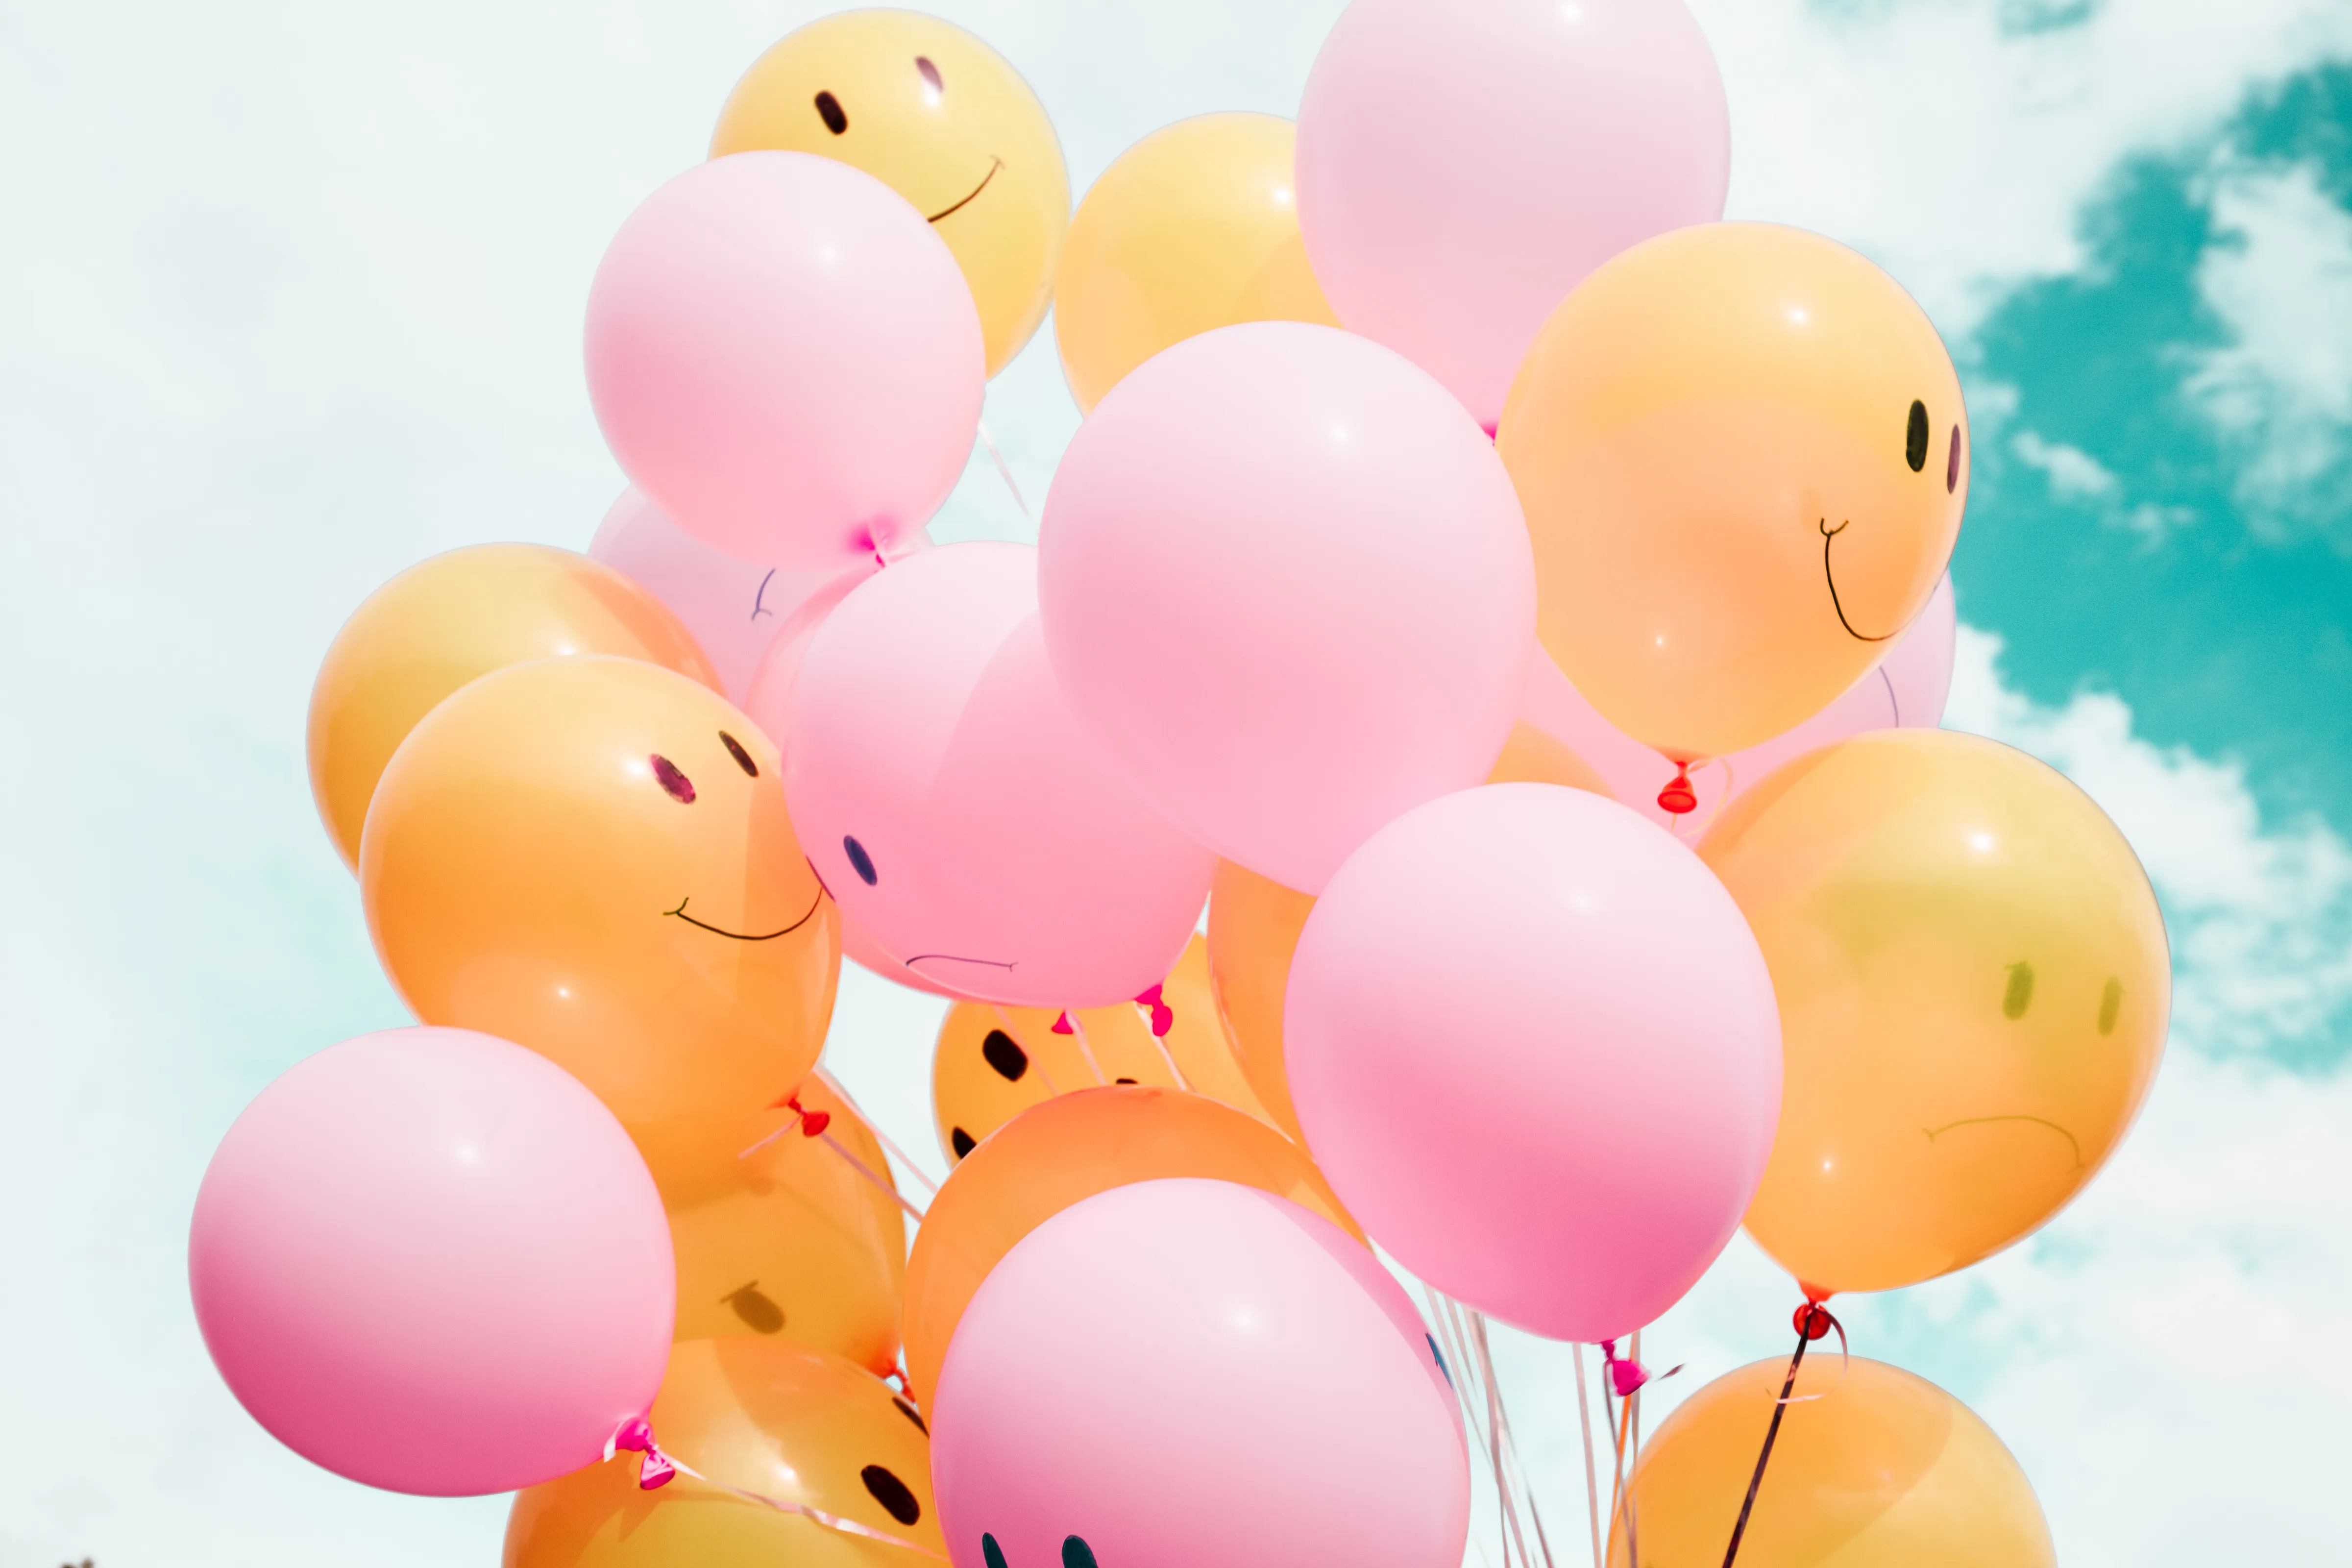 ballons with smiley faces